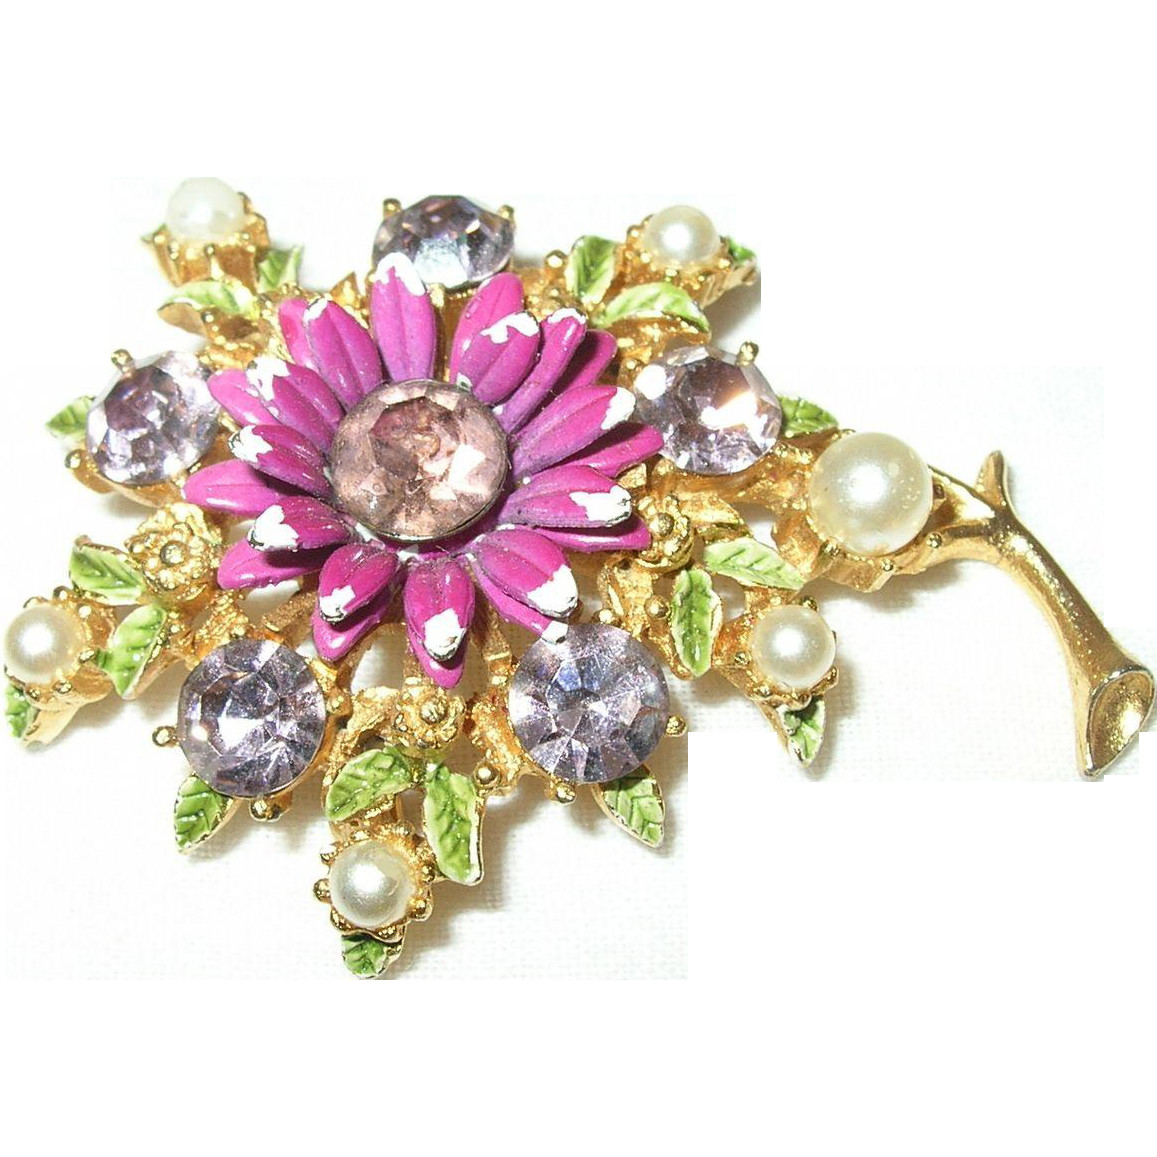 Brooches Photography
 Vintage Weiss Flower Brooch Enameled from robbiaantique on